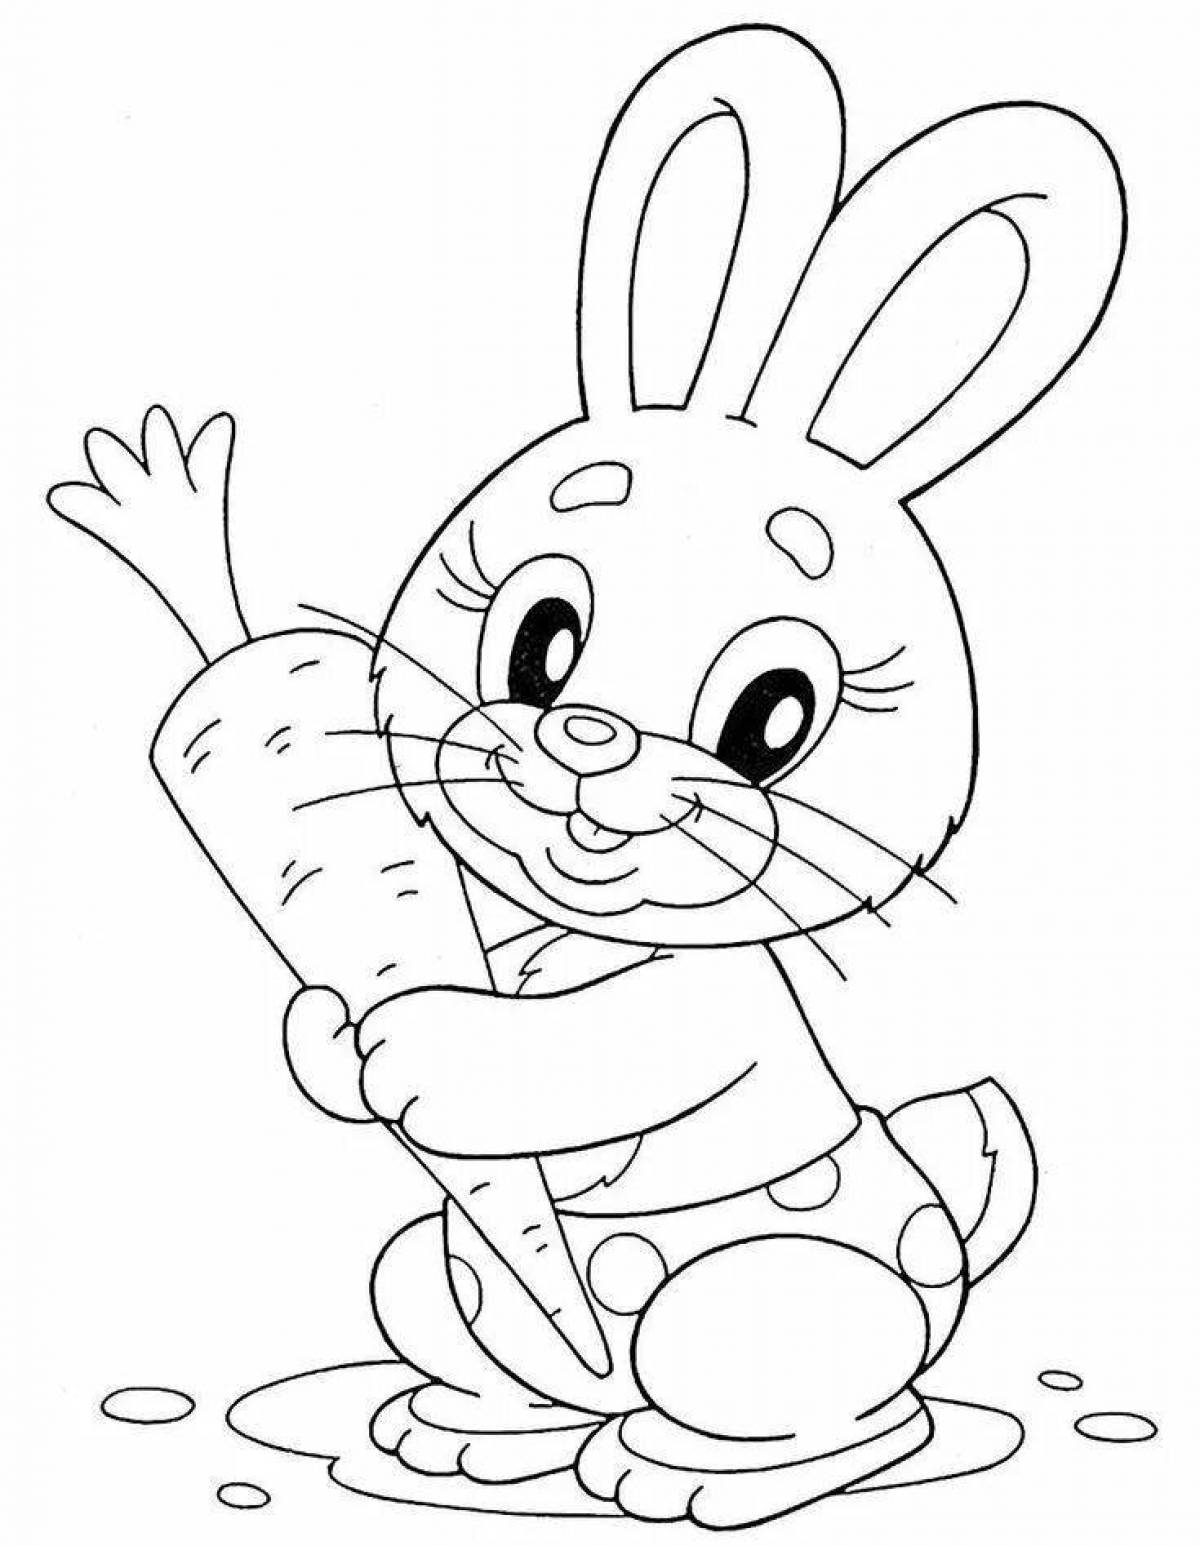 Chubby bunny coloring book with carrots